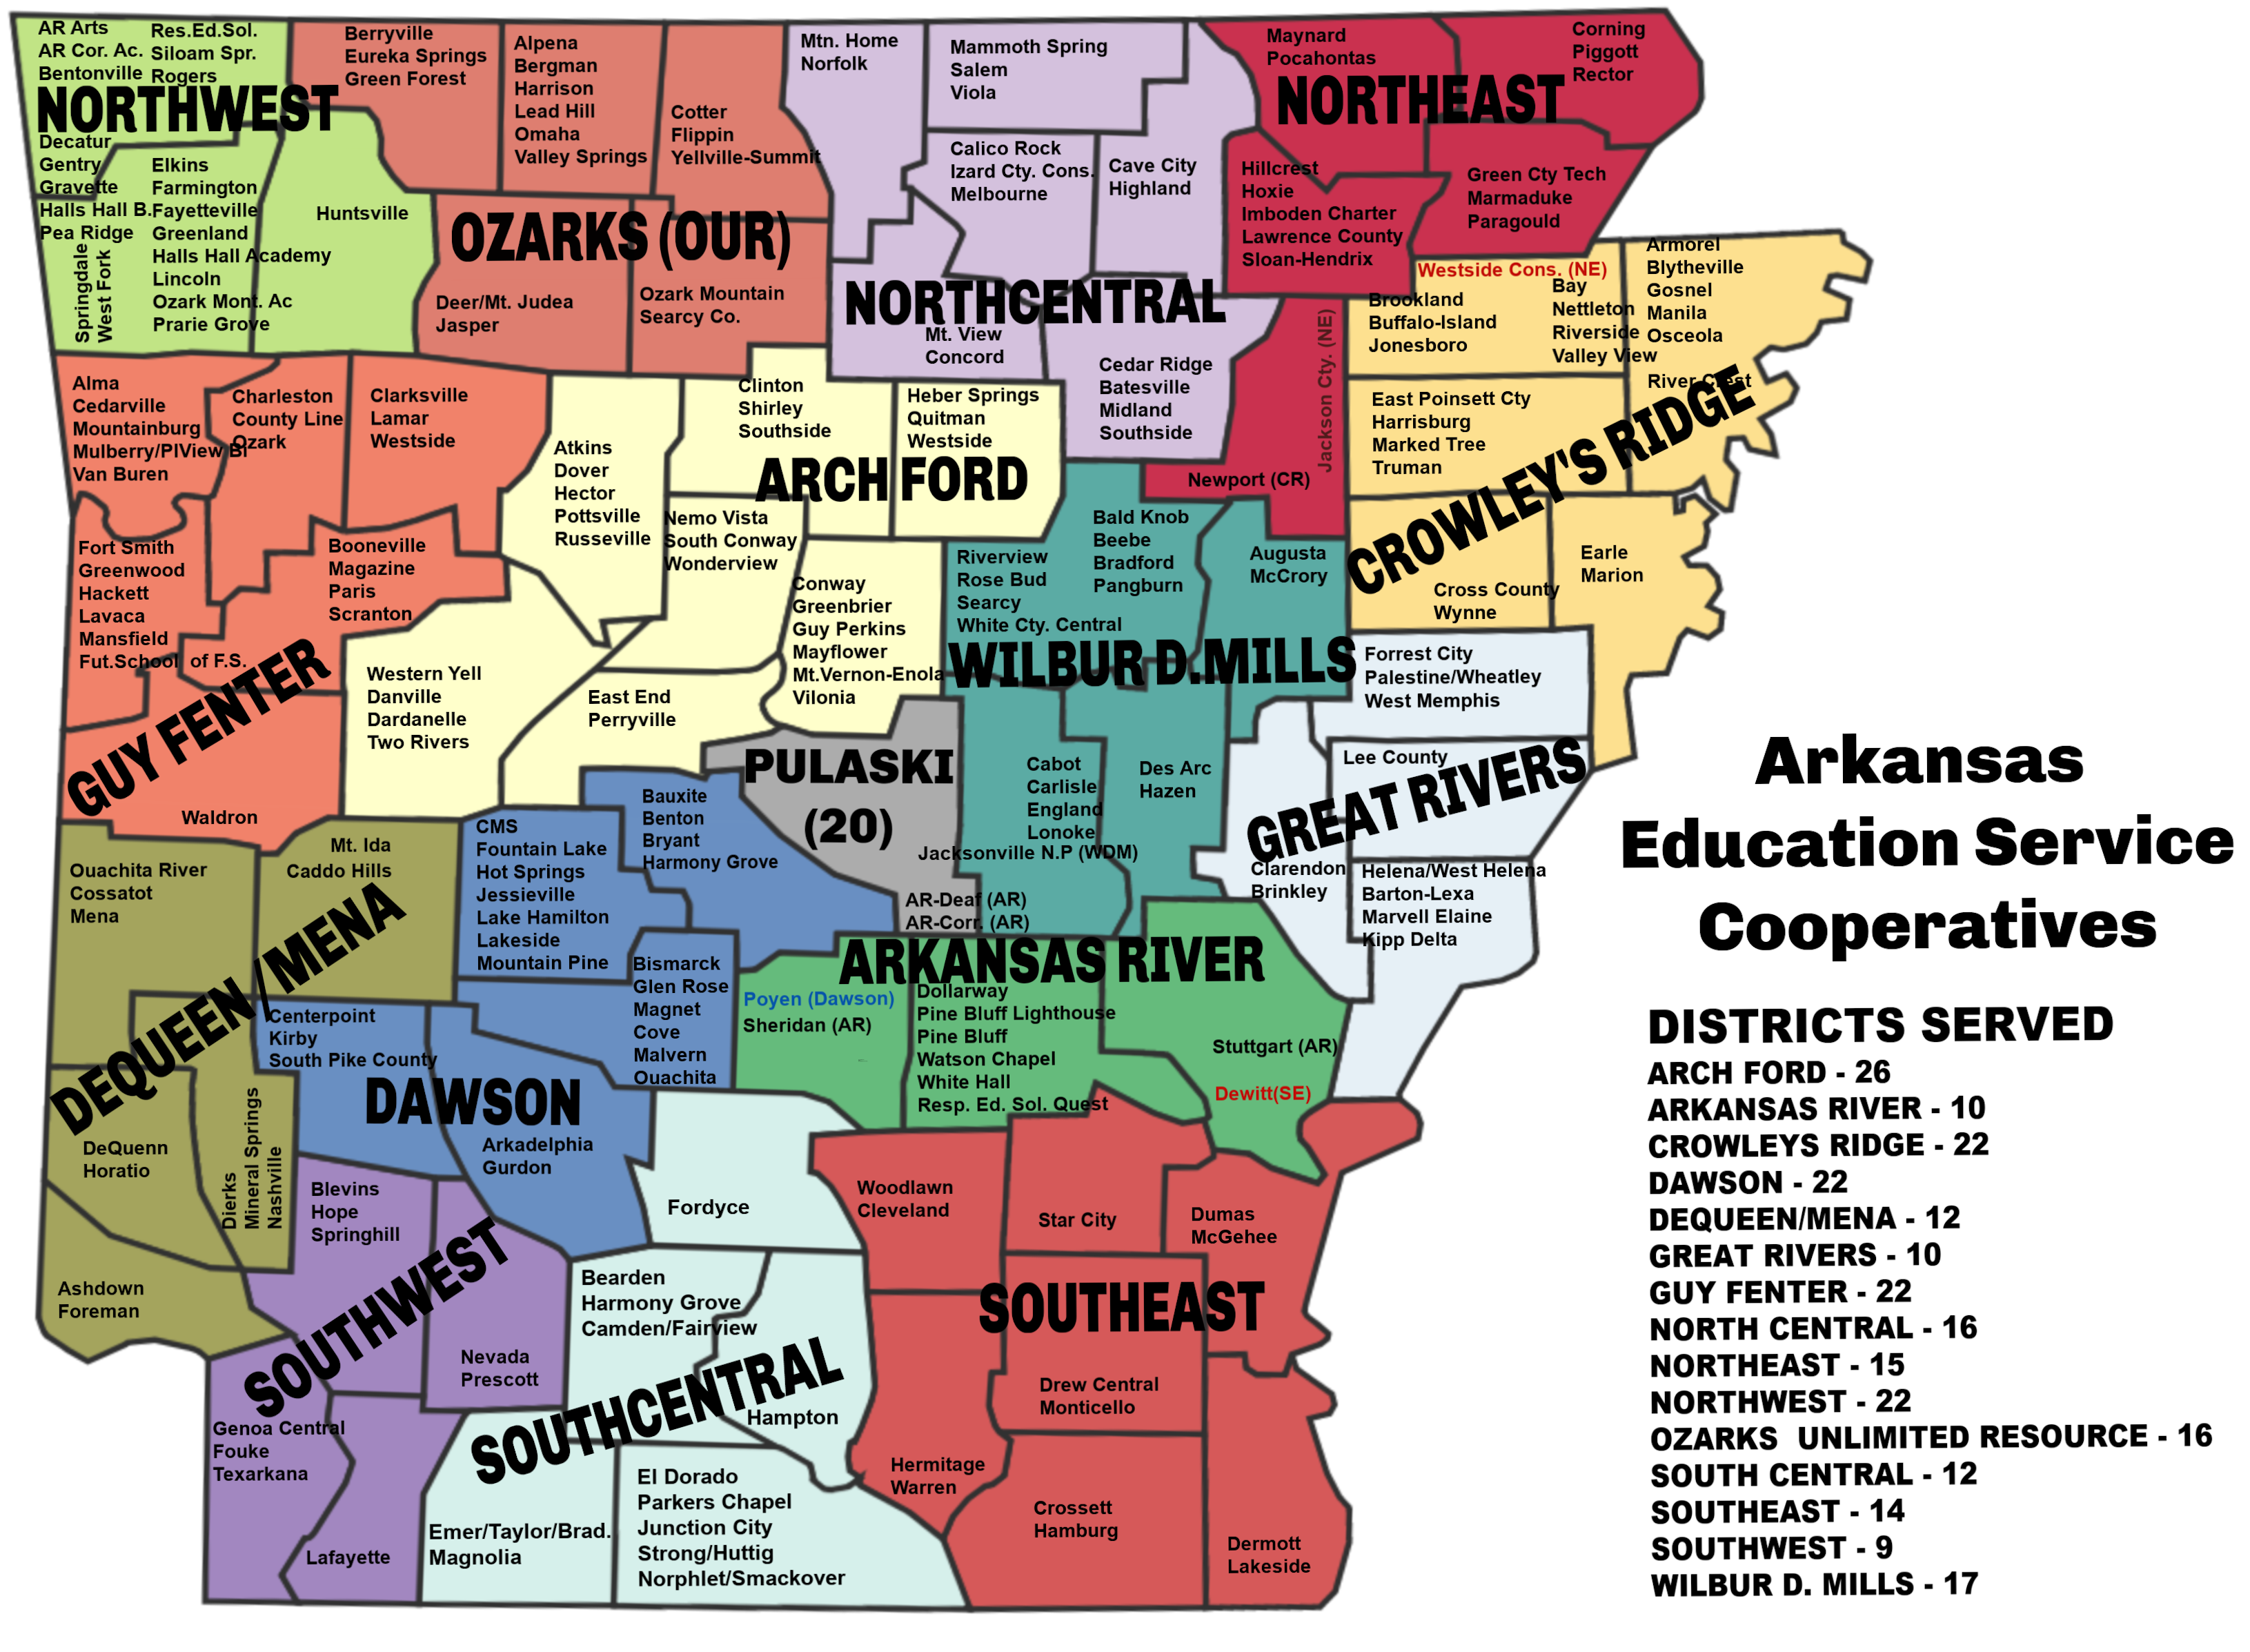 Map of Arkansas Education Service Cooperatives - Districts Served